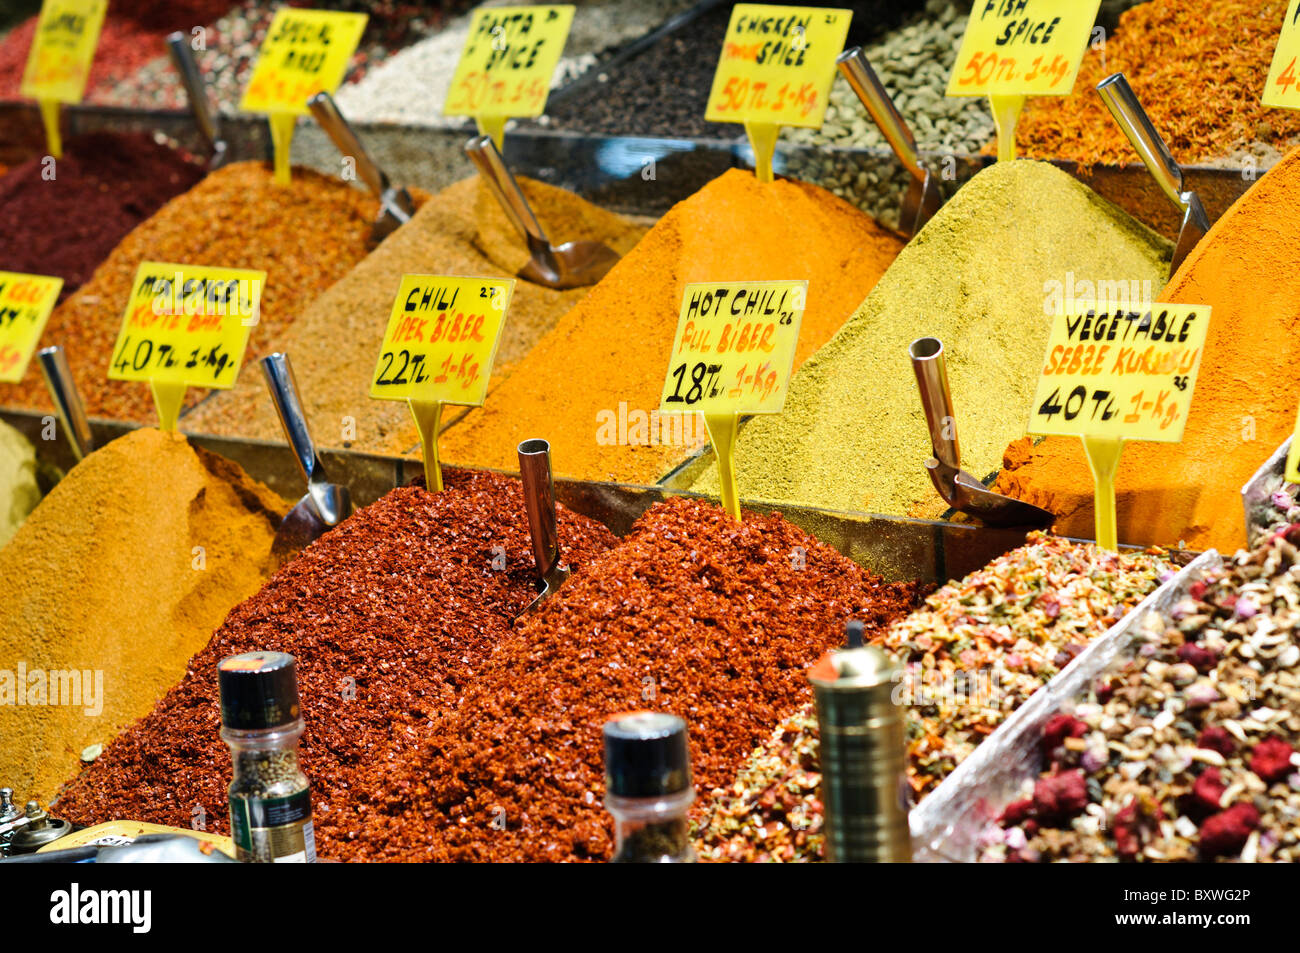 A range of spices available for sale at the famous Spice Bazaar (also known as the Egyption Bazaar) in Istanbul, Turkey. Stock Photo